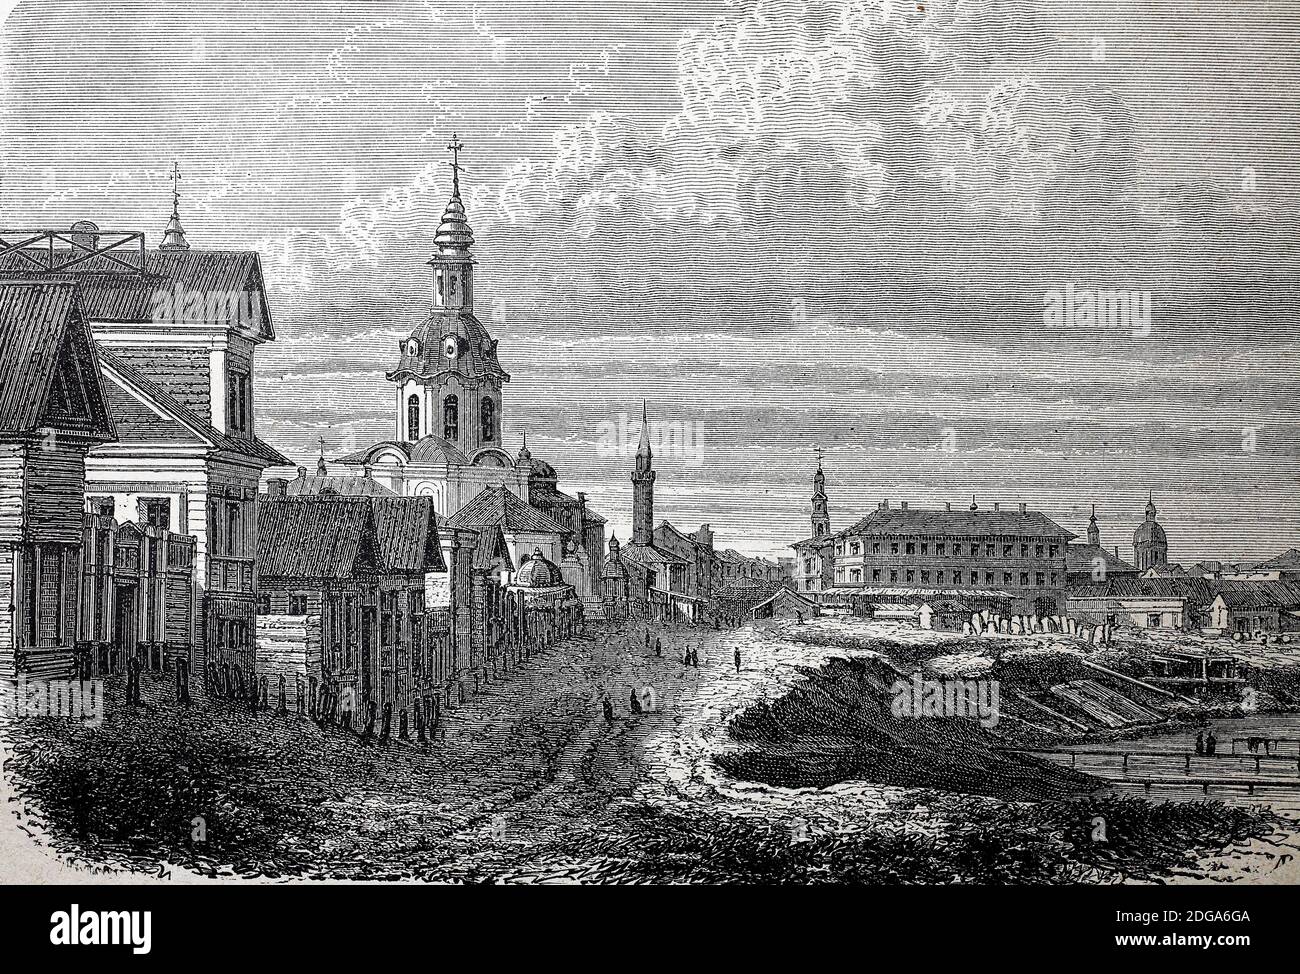 View of the city of Kazan, Kazan, today capital of the Republic of Tatarstan in Russia, view from 1880  /  Blick auf die Stadt Kasan, Kazan, heute Hauptstadt der Republik Tatarstan in Russland, Ansicht von 1880, Historisch, historical, digital improved reproduction of an original from the 19th century / digitale Reproduktion einer Originalvorlage aus dem 19. Jahrhundert Stock Photo